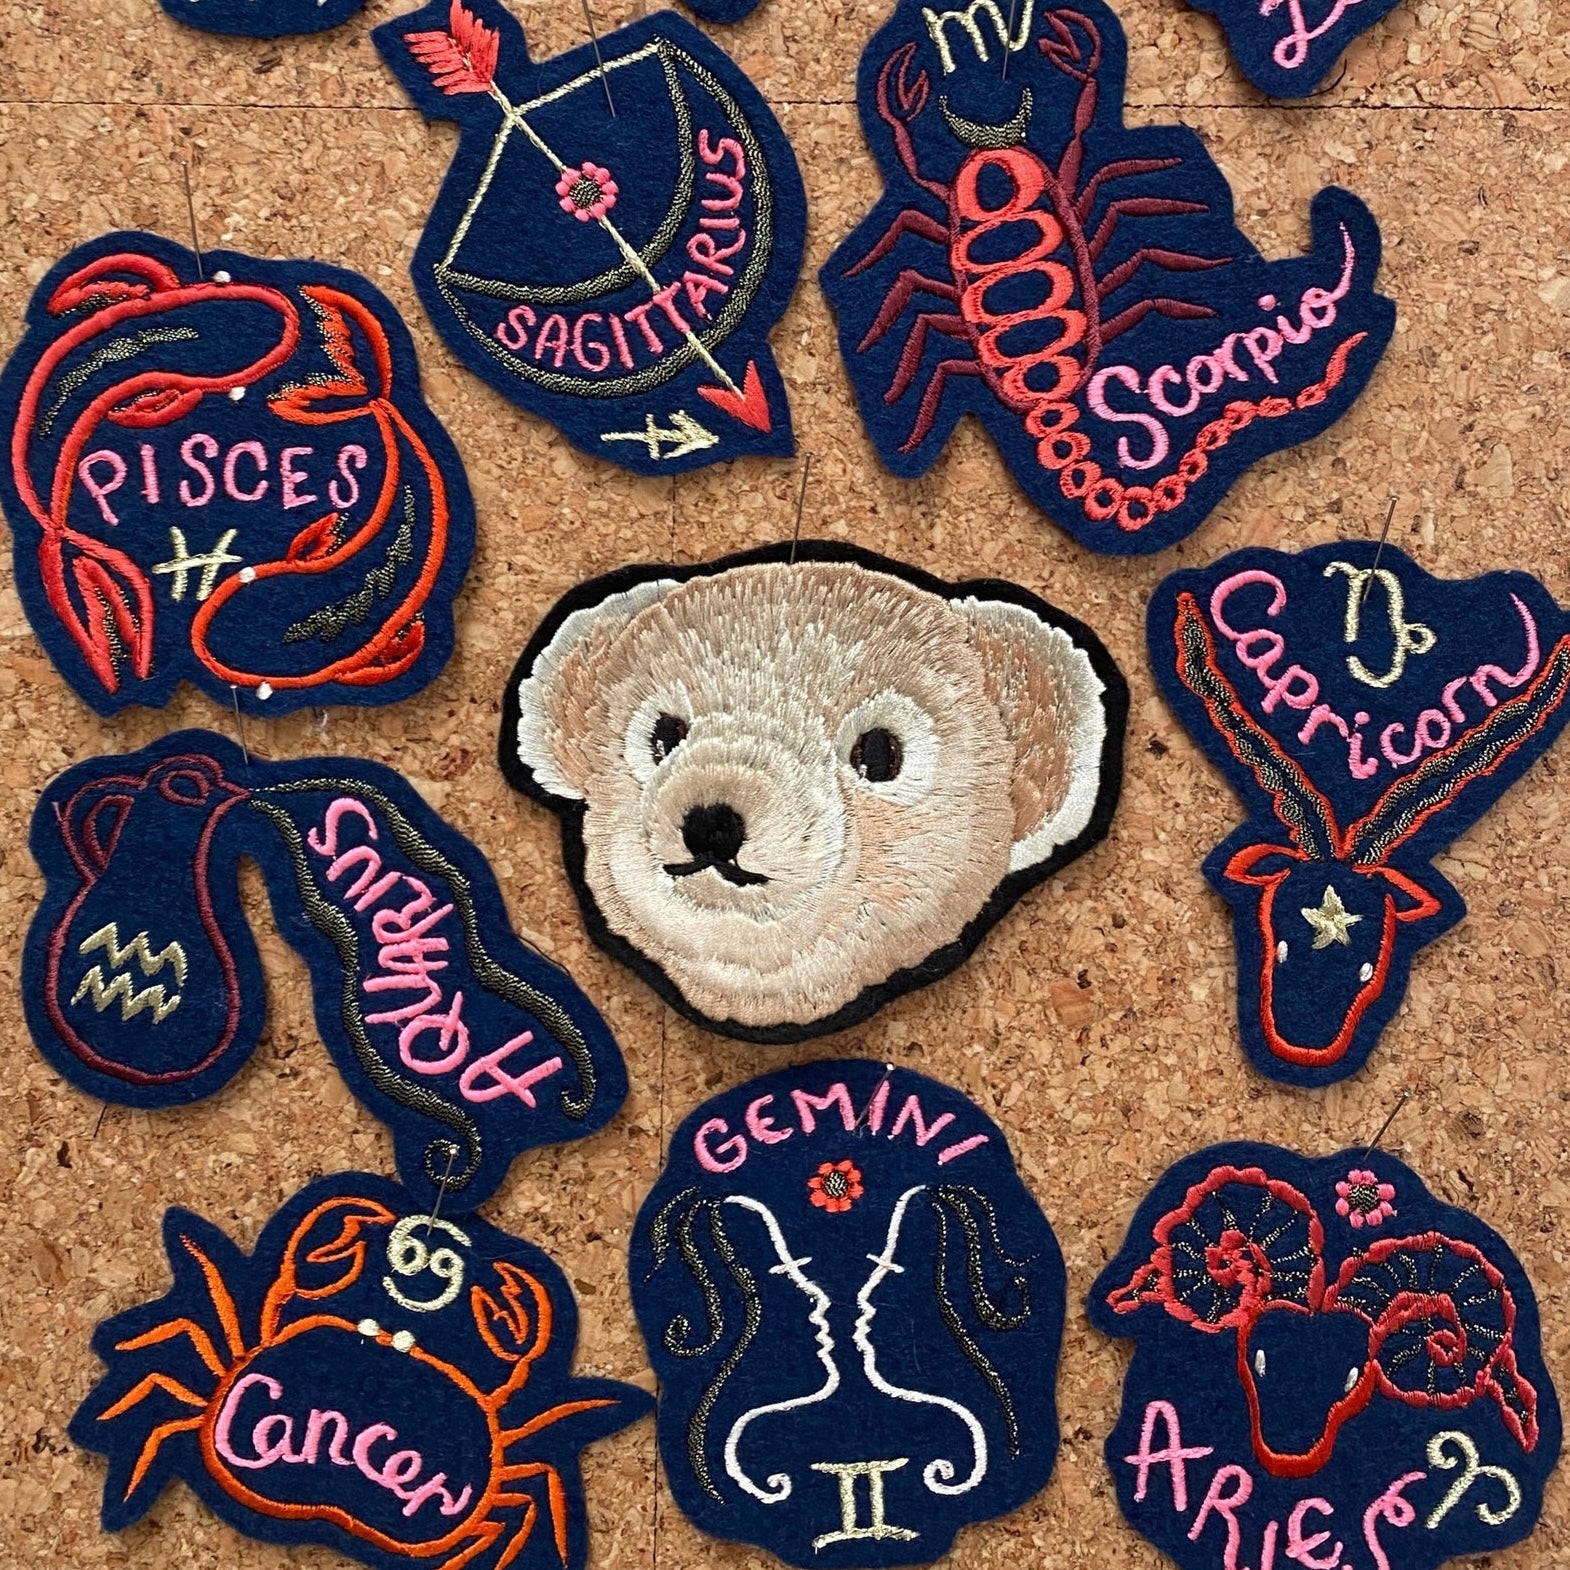 Ellie Mac embroidery's cork board with zodiac patches pinned to it